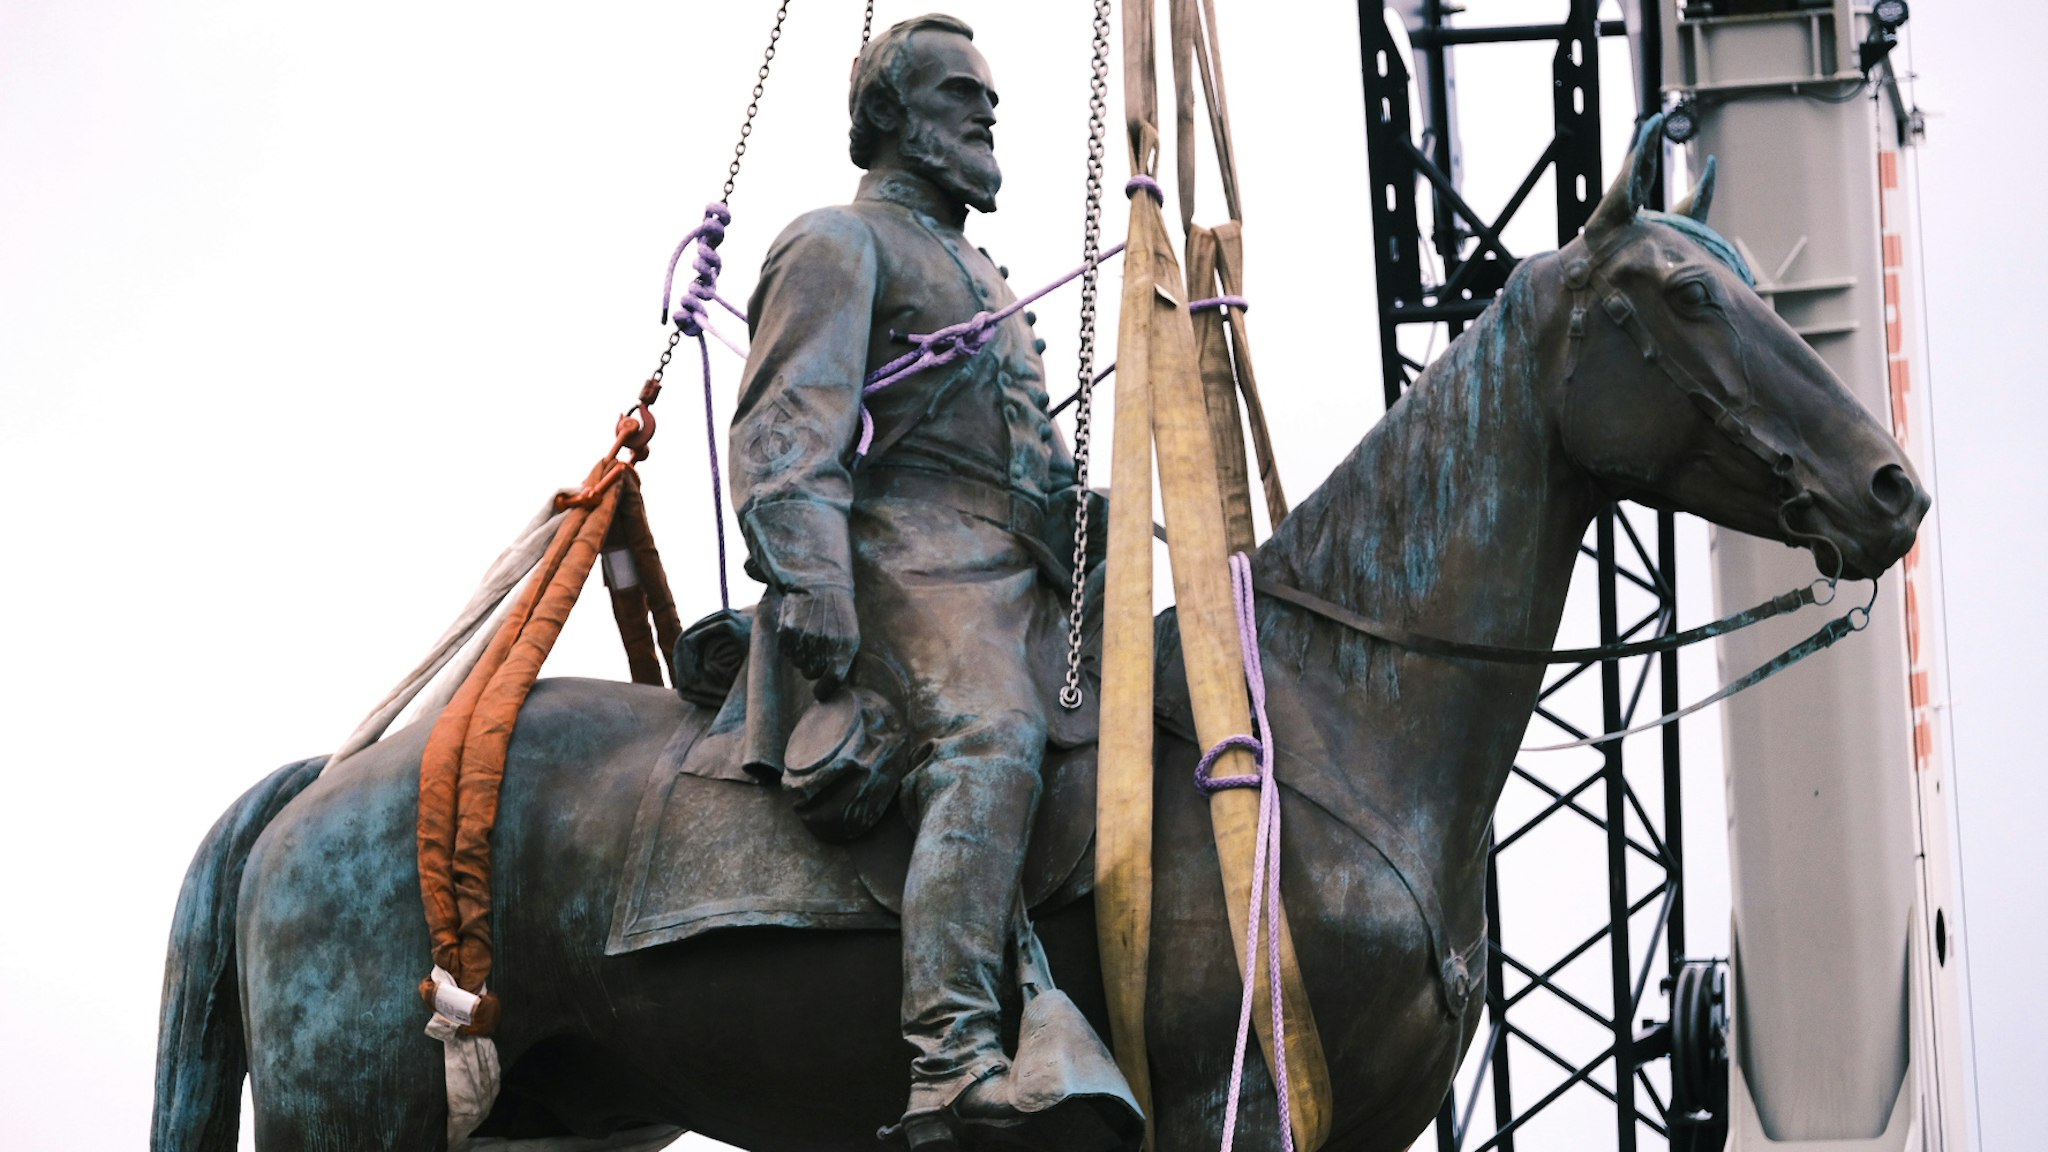 RICHMOND, VA - JULY 01: The Stonewall Jackson Monument in Richmond Virginia as it is being removed off by a crane on July 1, 2020 in Richmond, Virginia. Mayor Levar Stoney ordered the removal of all Confederate statues from city land.